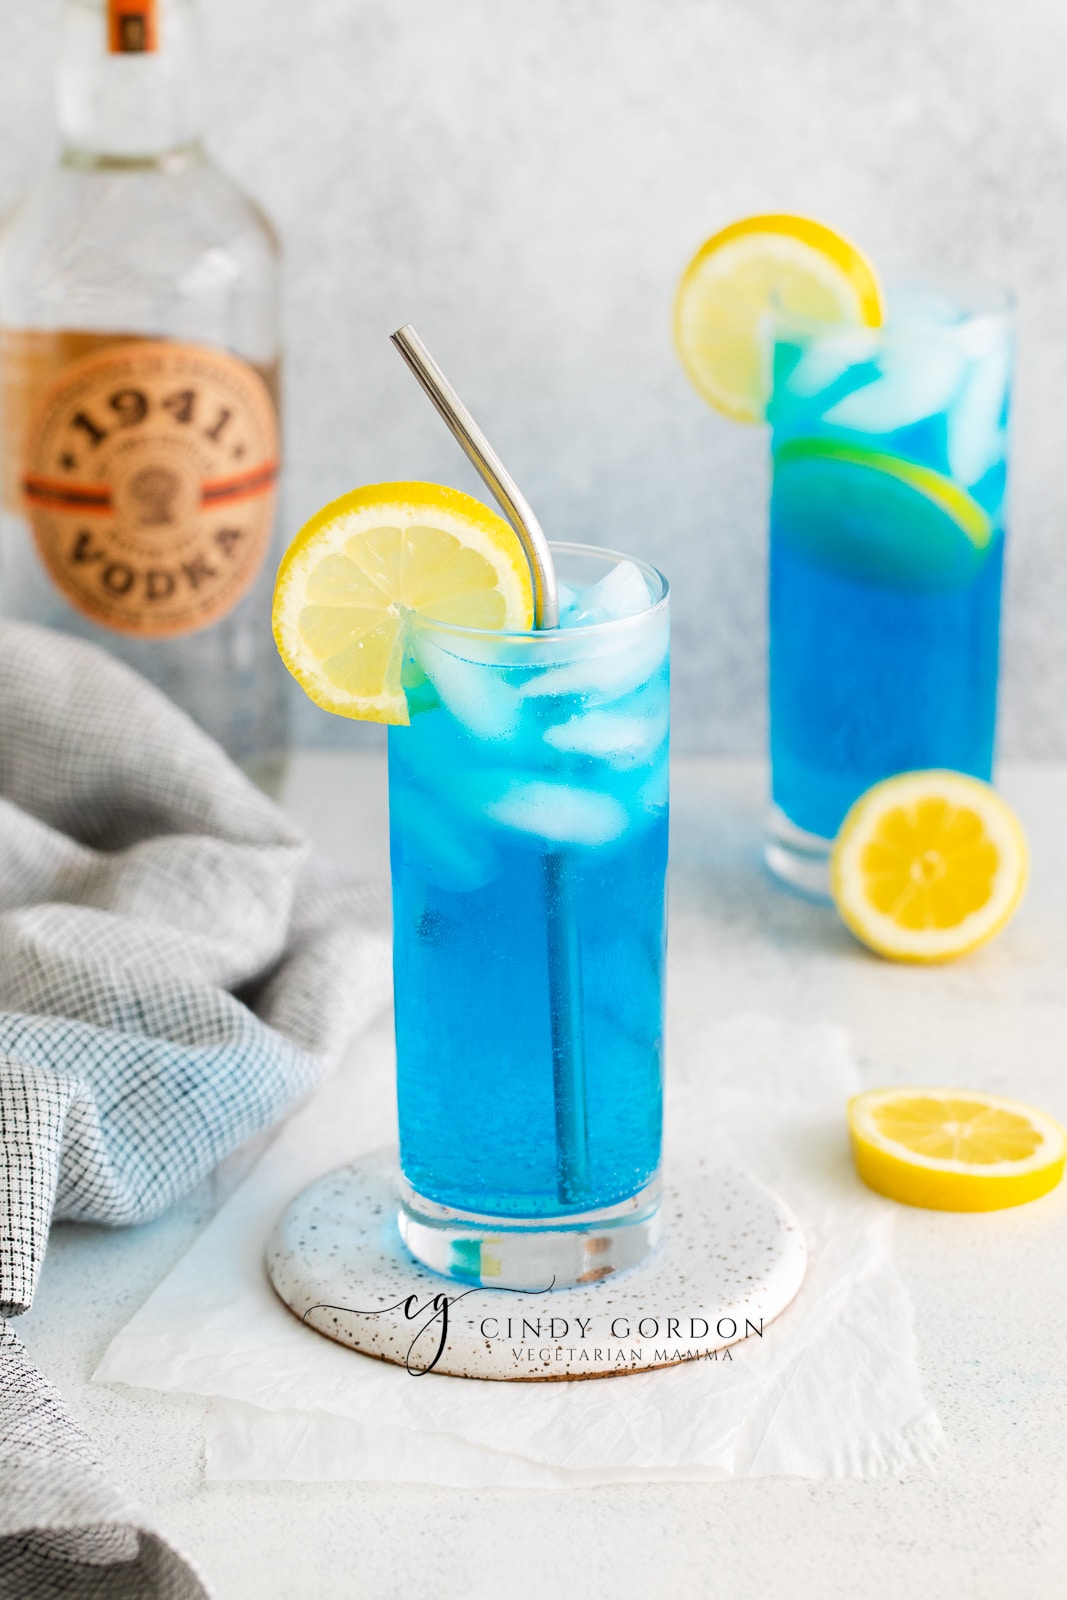 two clear tall glasses filled with ice and a blue liquid, topped with lemon slices, lemon slices also on counter, vodka bottle in back and towel to left side sex on the driveway drink